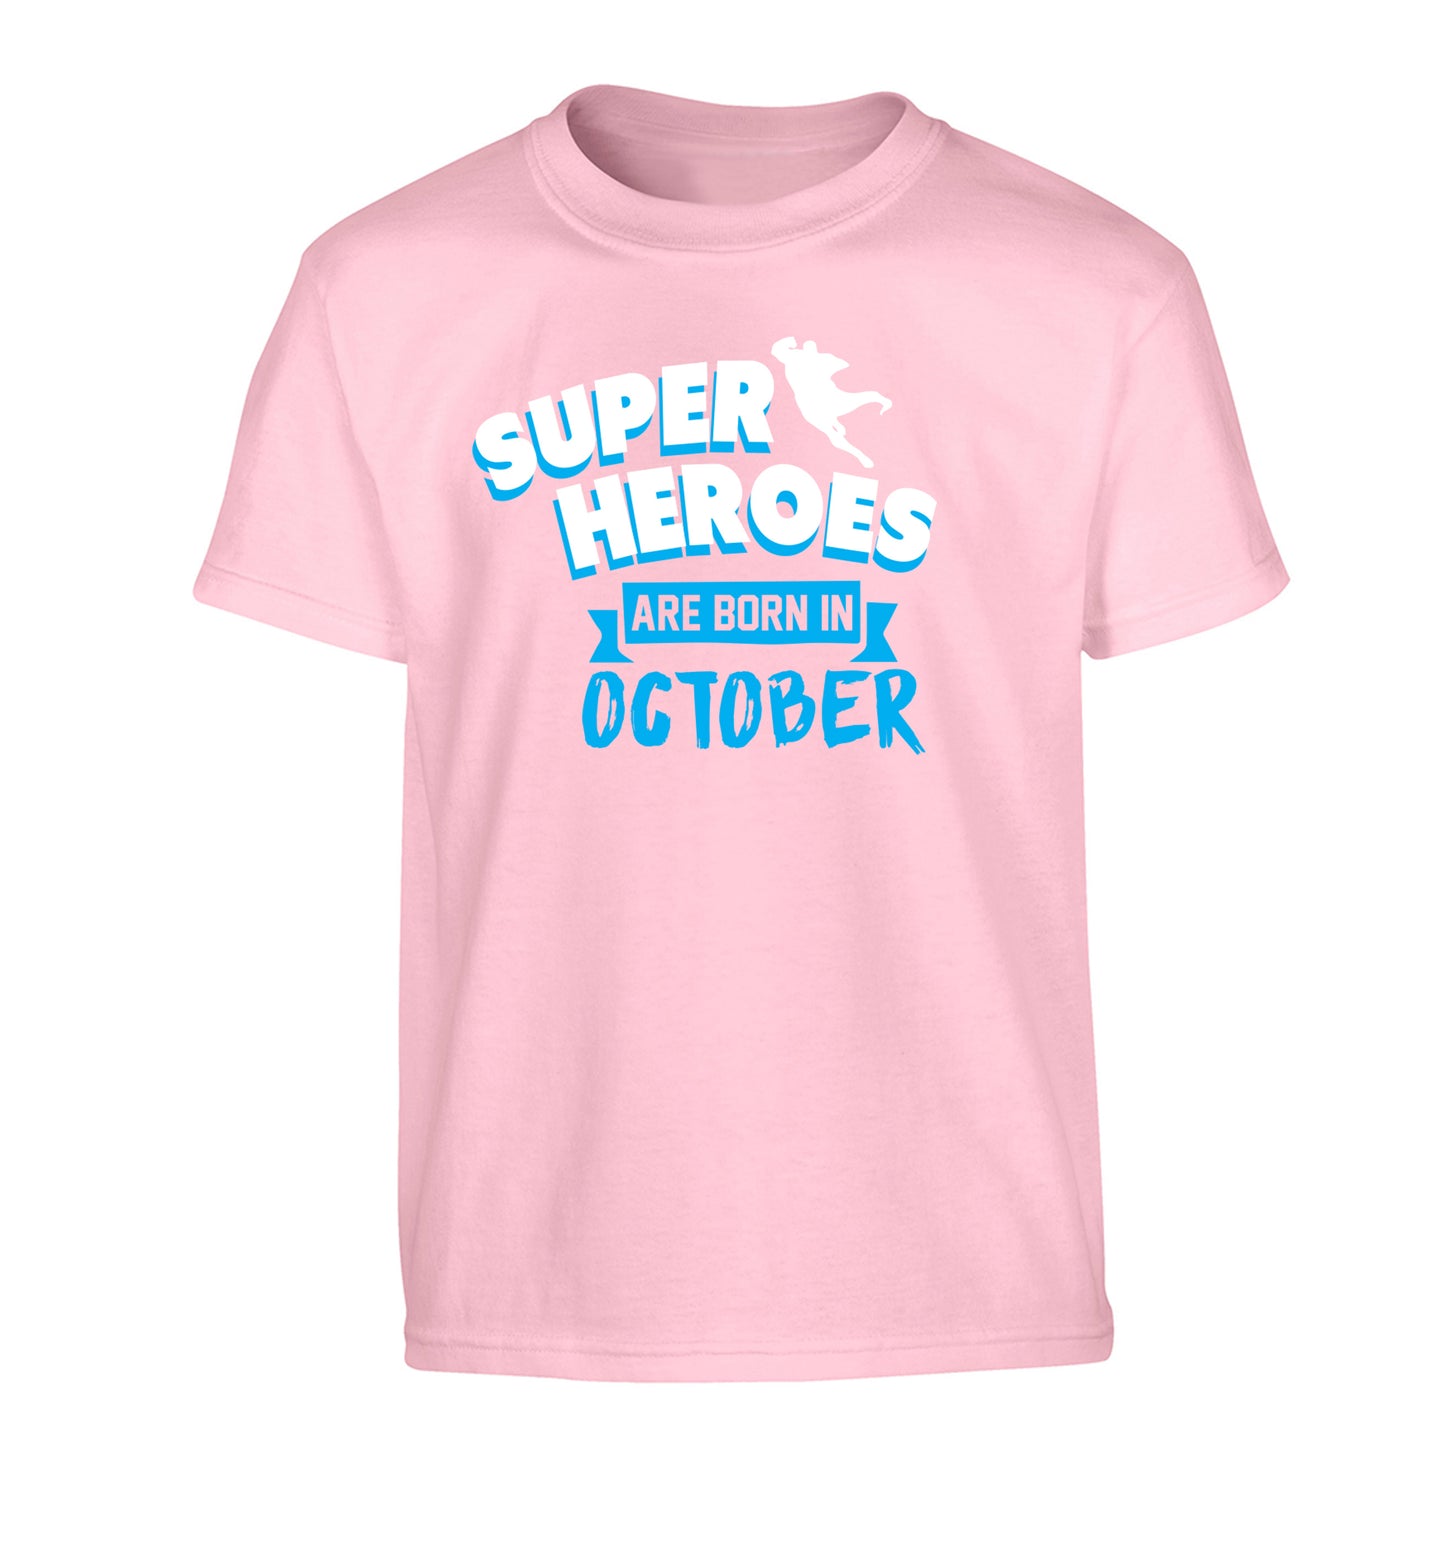 Superheroes are born in October Children's light pink Tshirt 12-13 Years